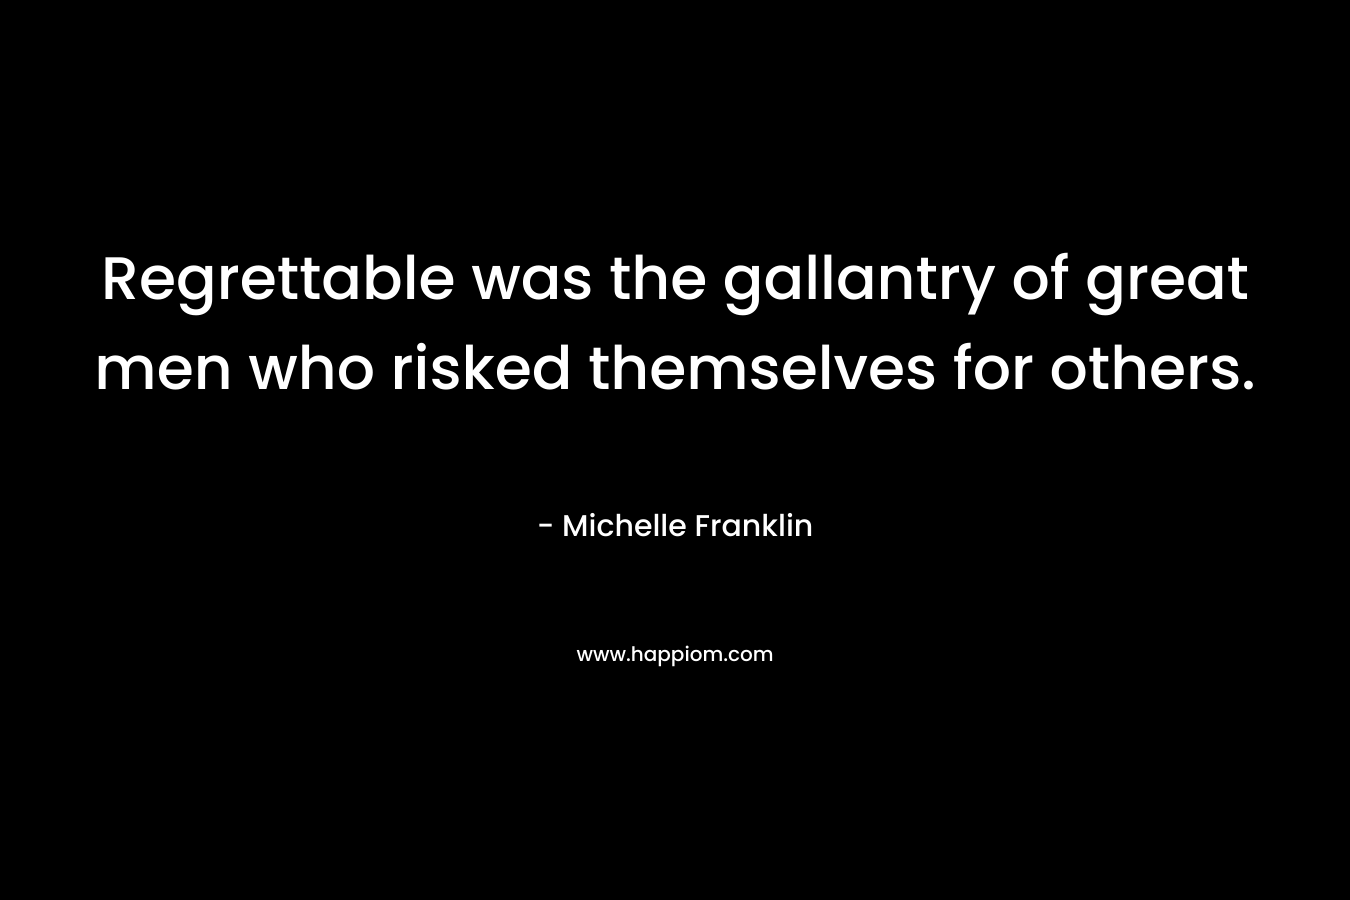 Regrettable was the gallantry of great men who risked themselves for others. – Michelle Franklin